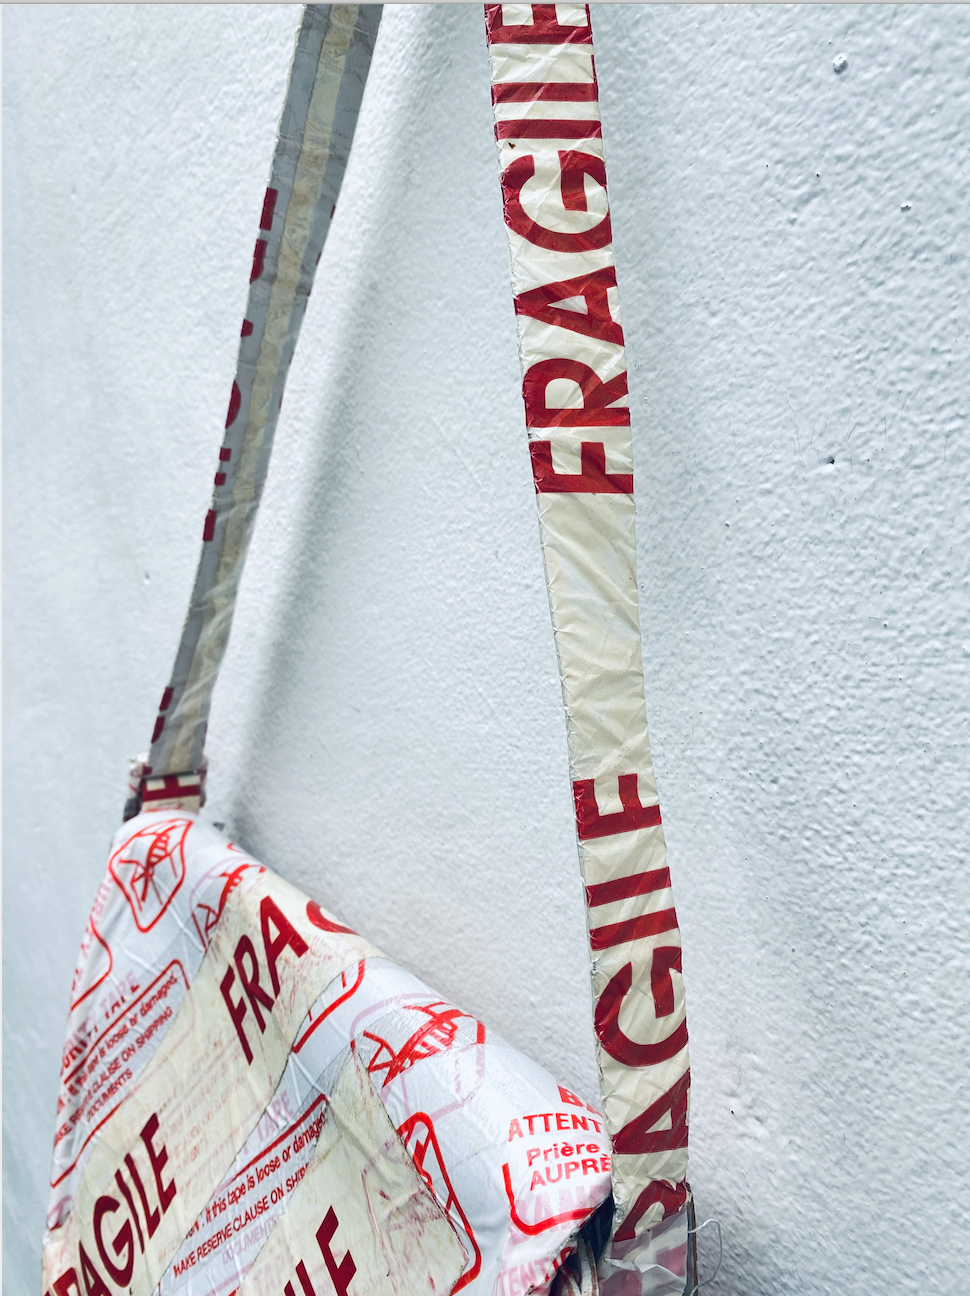 S/S 2006 « Fragile » Scotch Tapes Bag